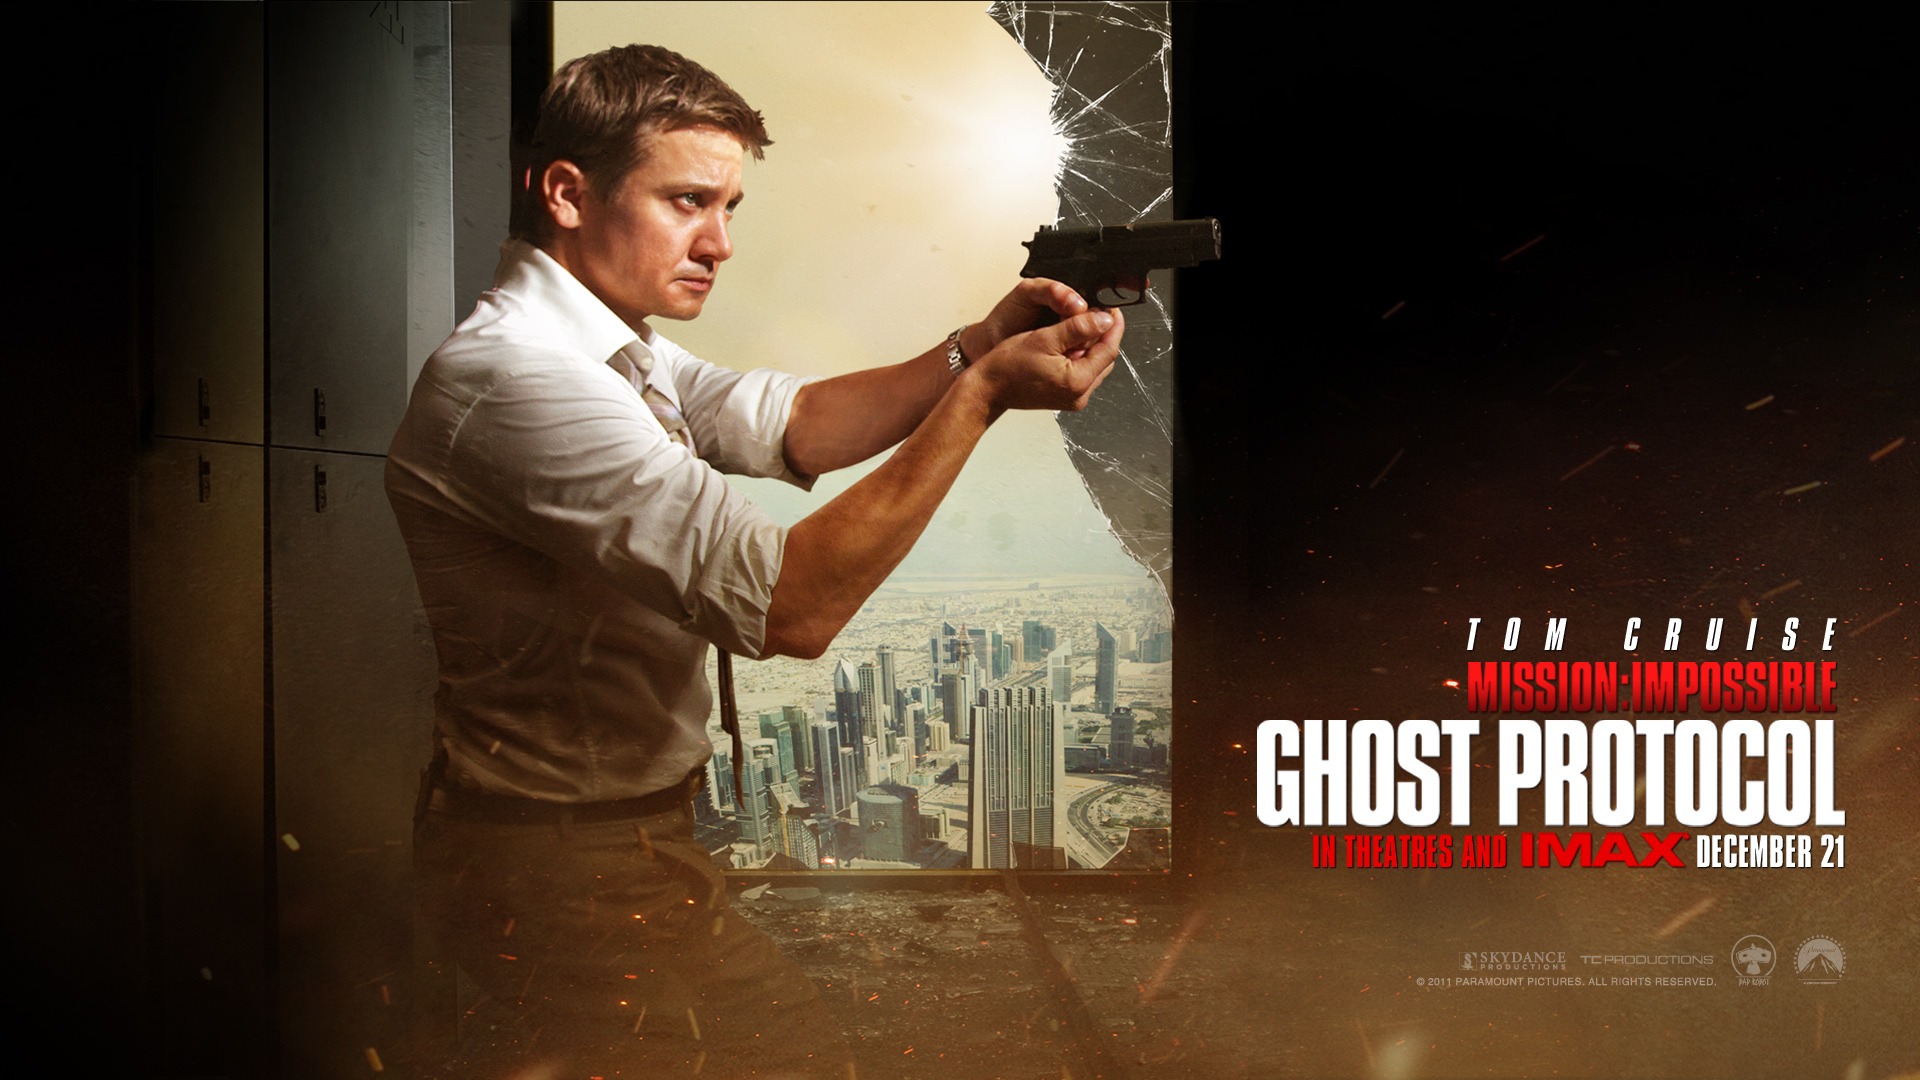 Mission: Impossible - Ghost Protocol 碟中谍4 高清壁纸2 - 1920x1080